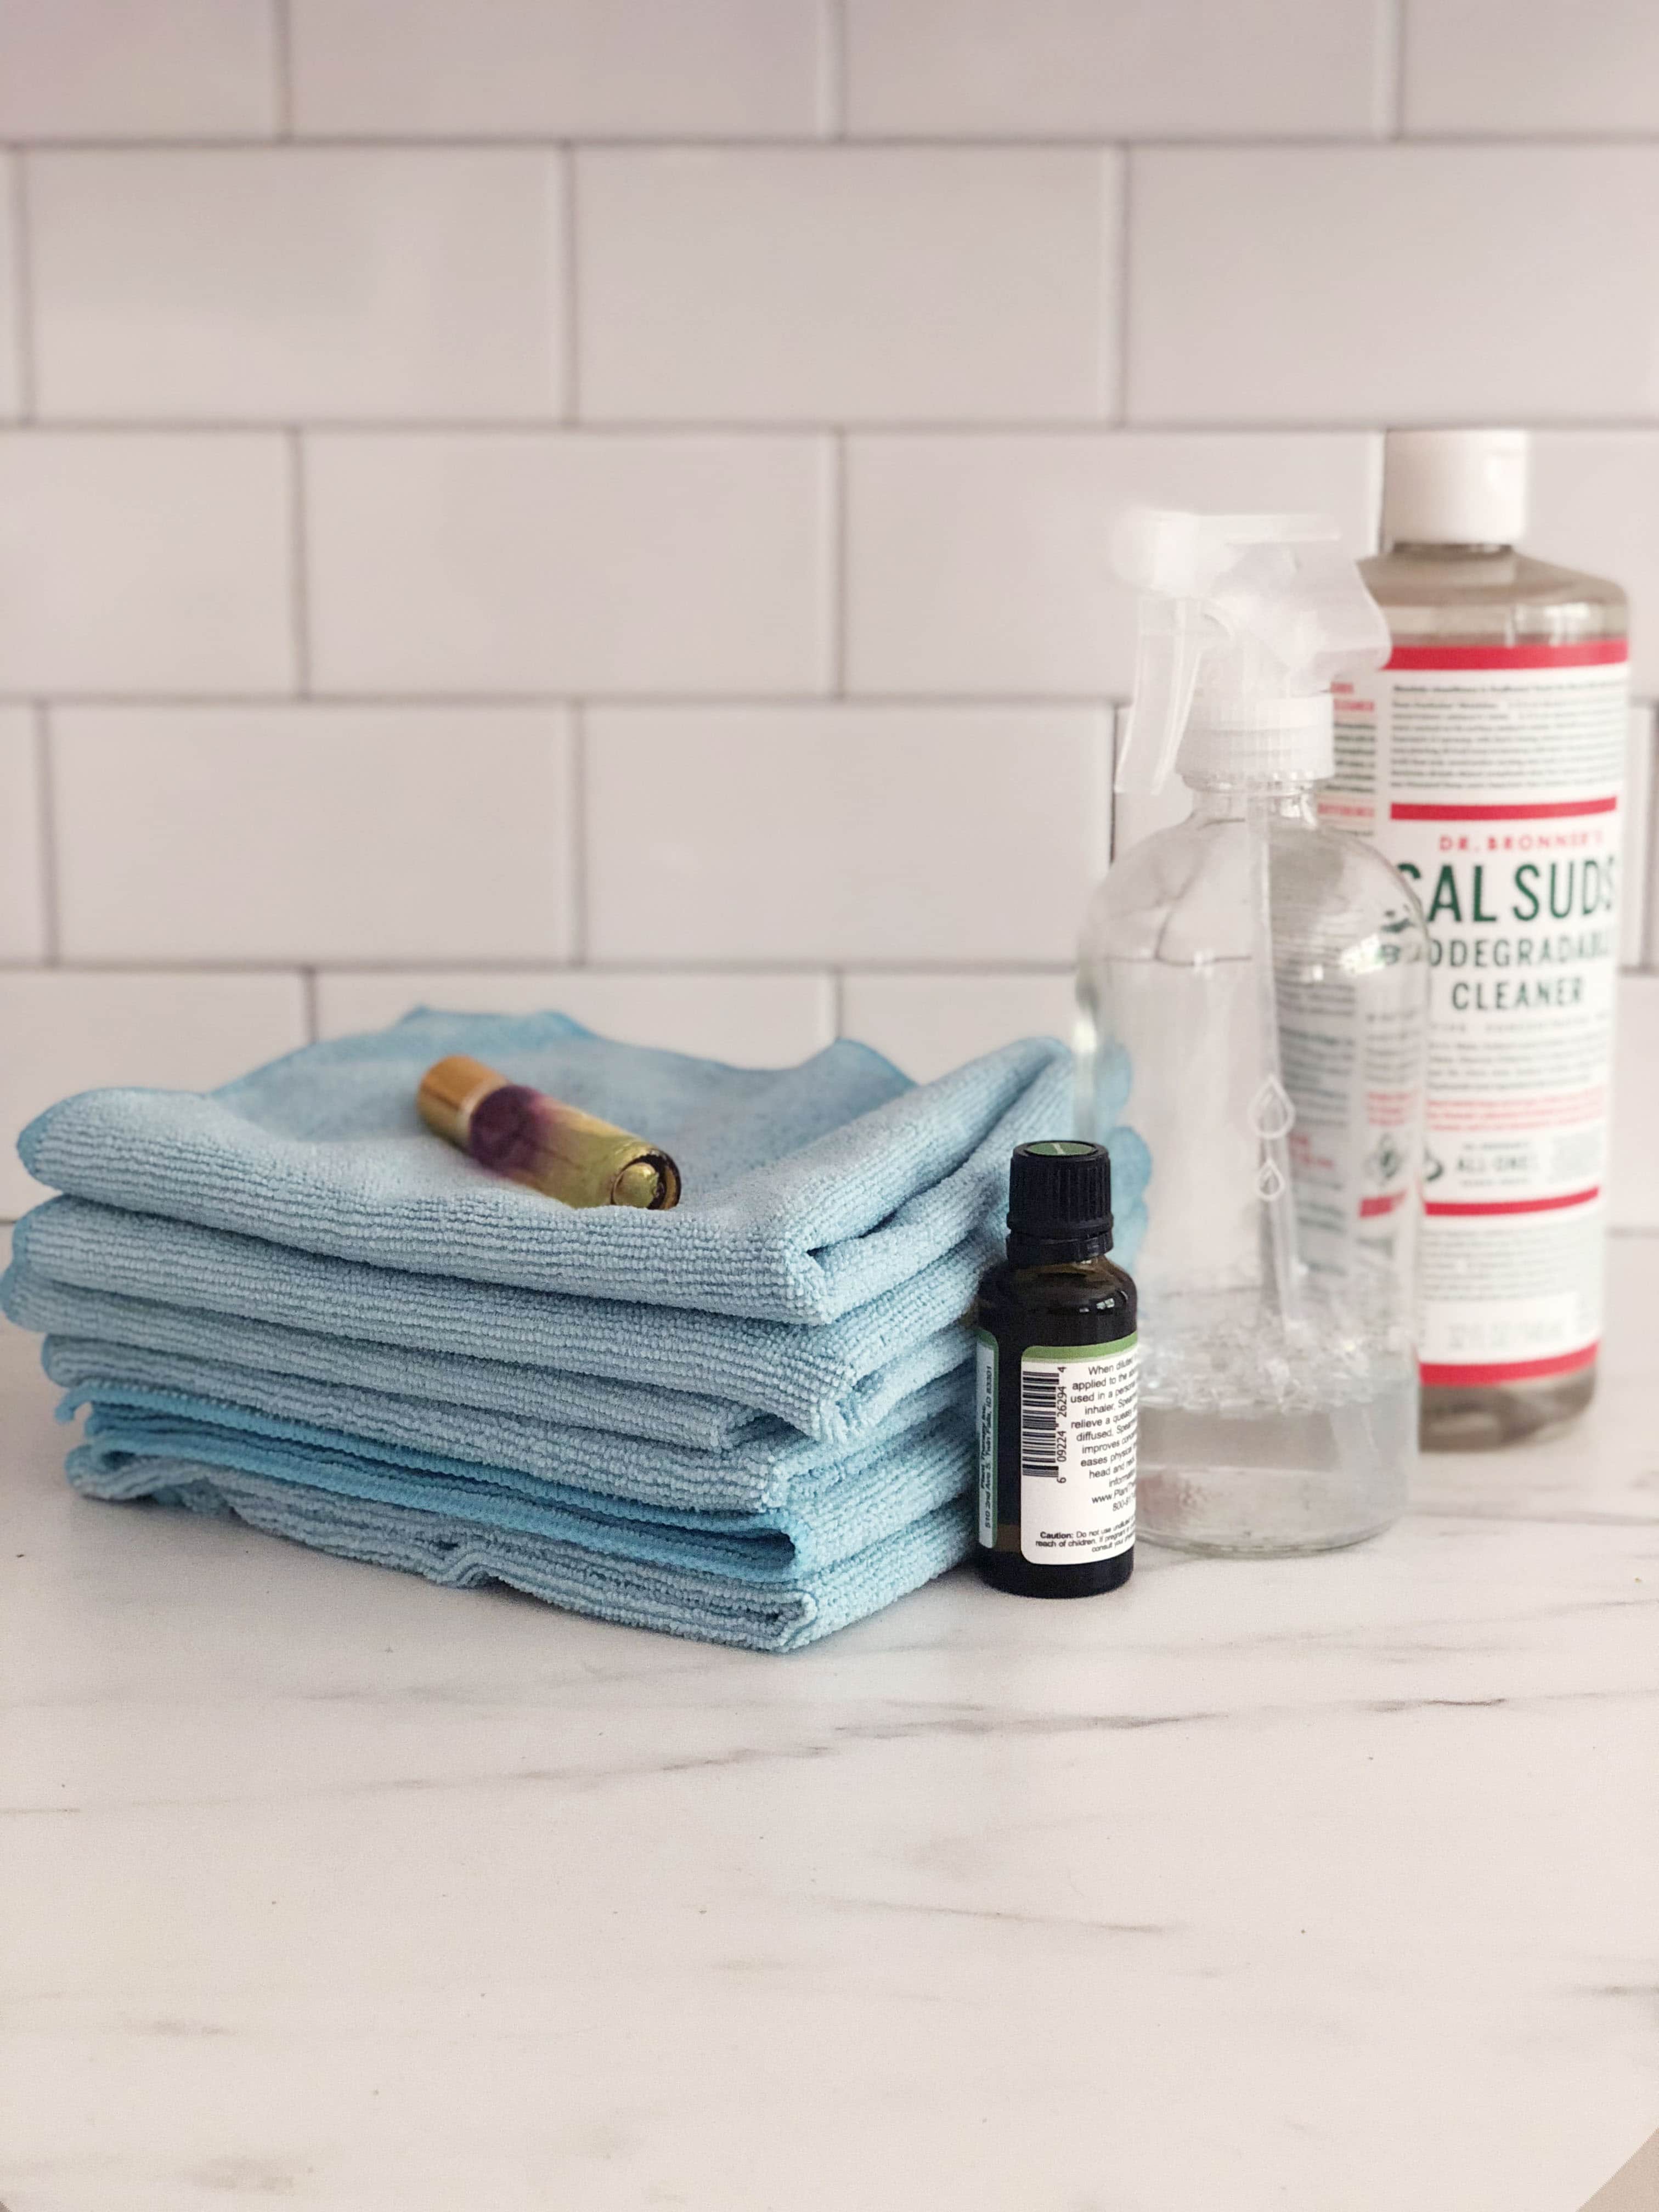 Blue microfiber rag, glass bottle, sal suds soap, and essential oils to make a natural cleaning spray. 